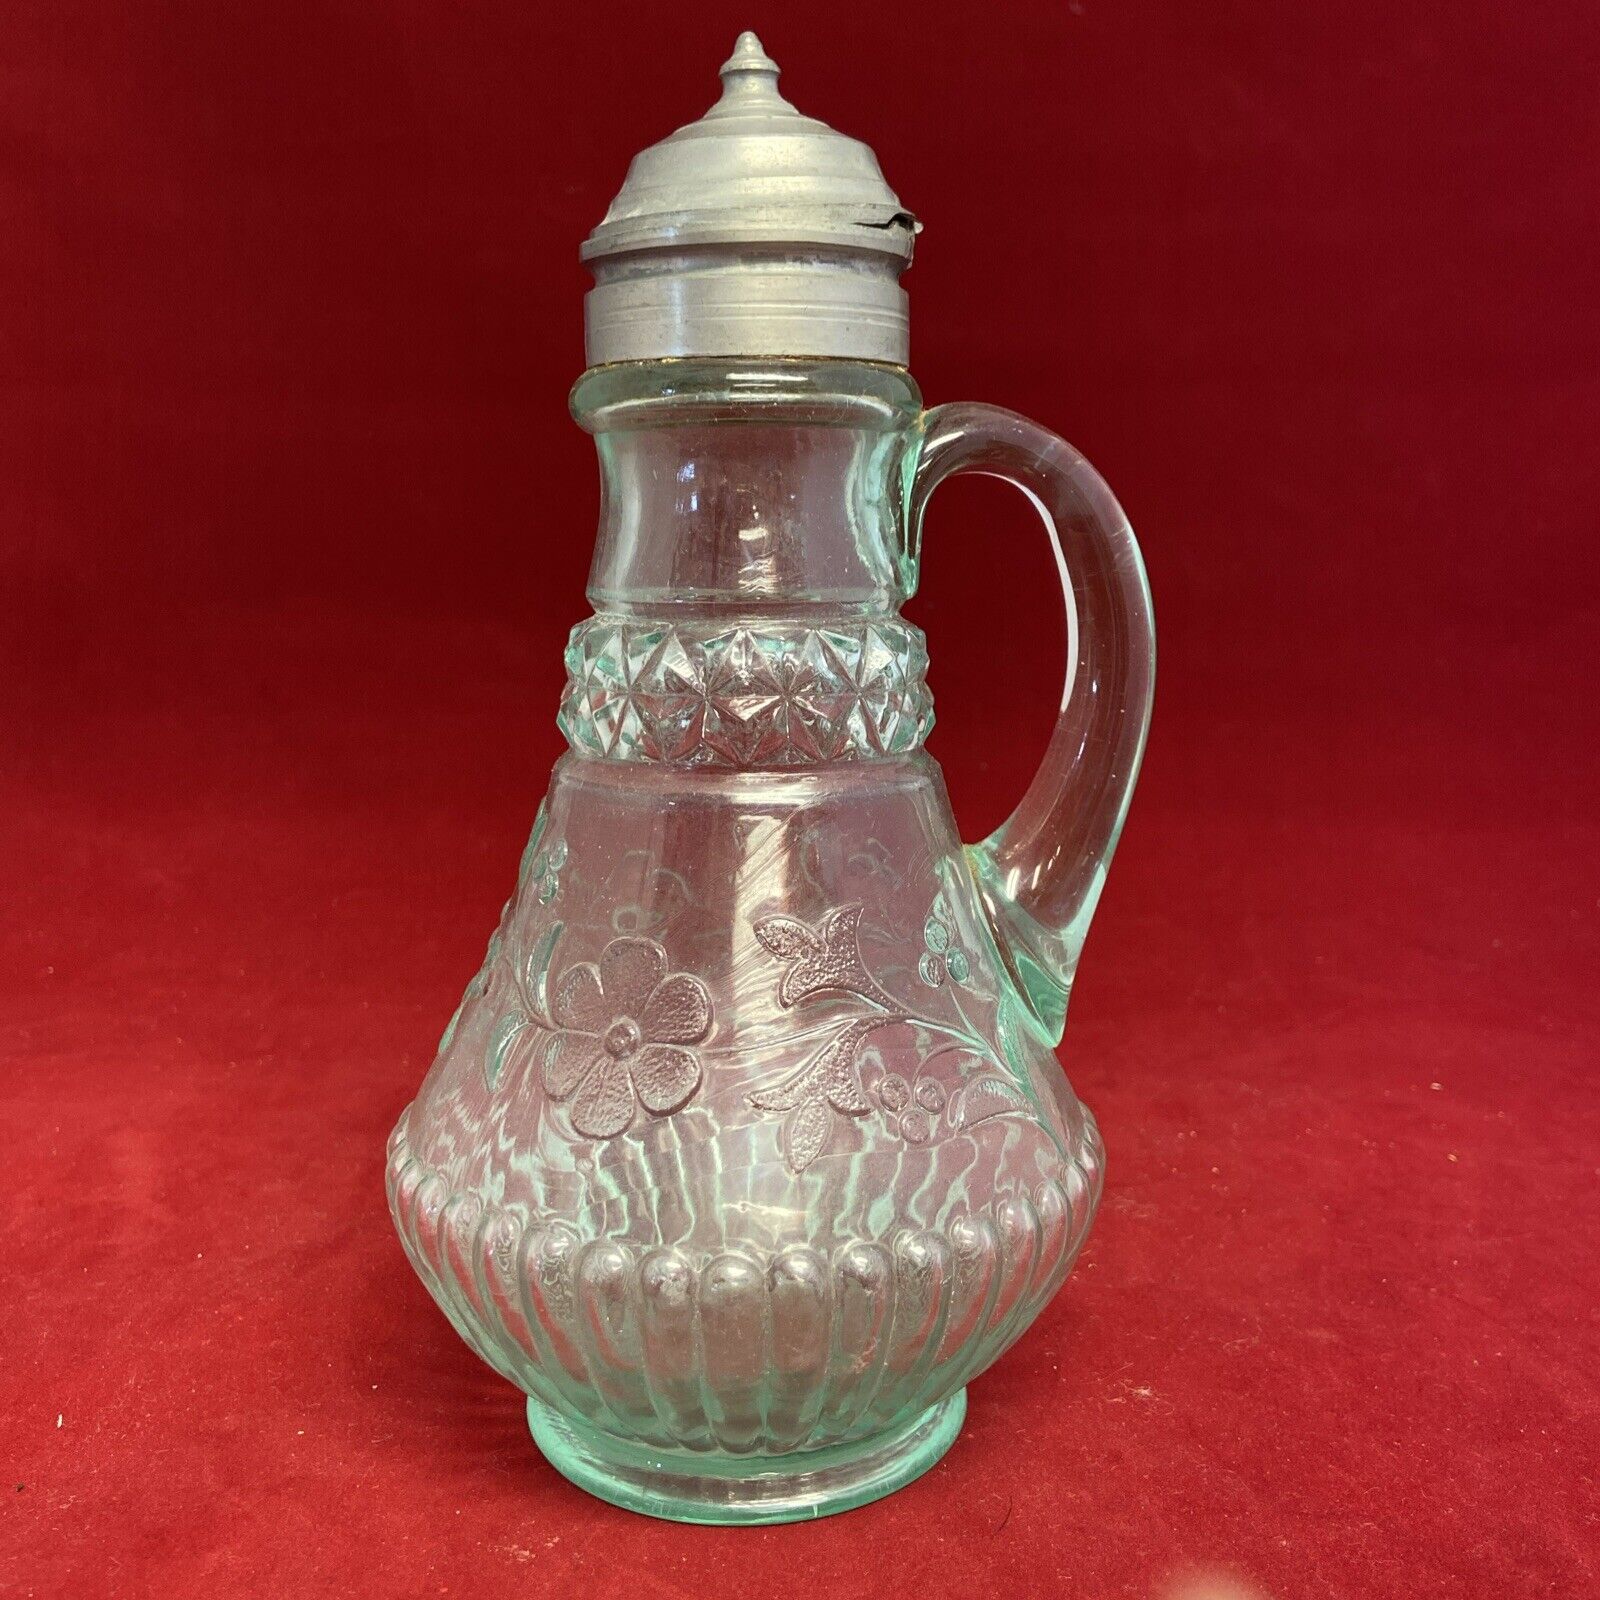 1880s RARE APPLE GREEN VASELINE GLASS ADAMS NO.140 WILDFLOWER EAPG SYRUP PITCHER